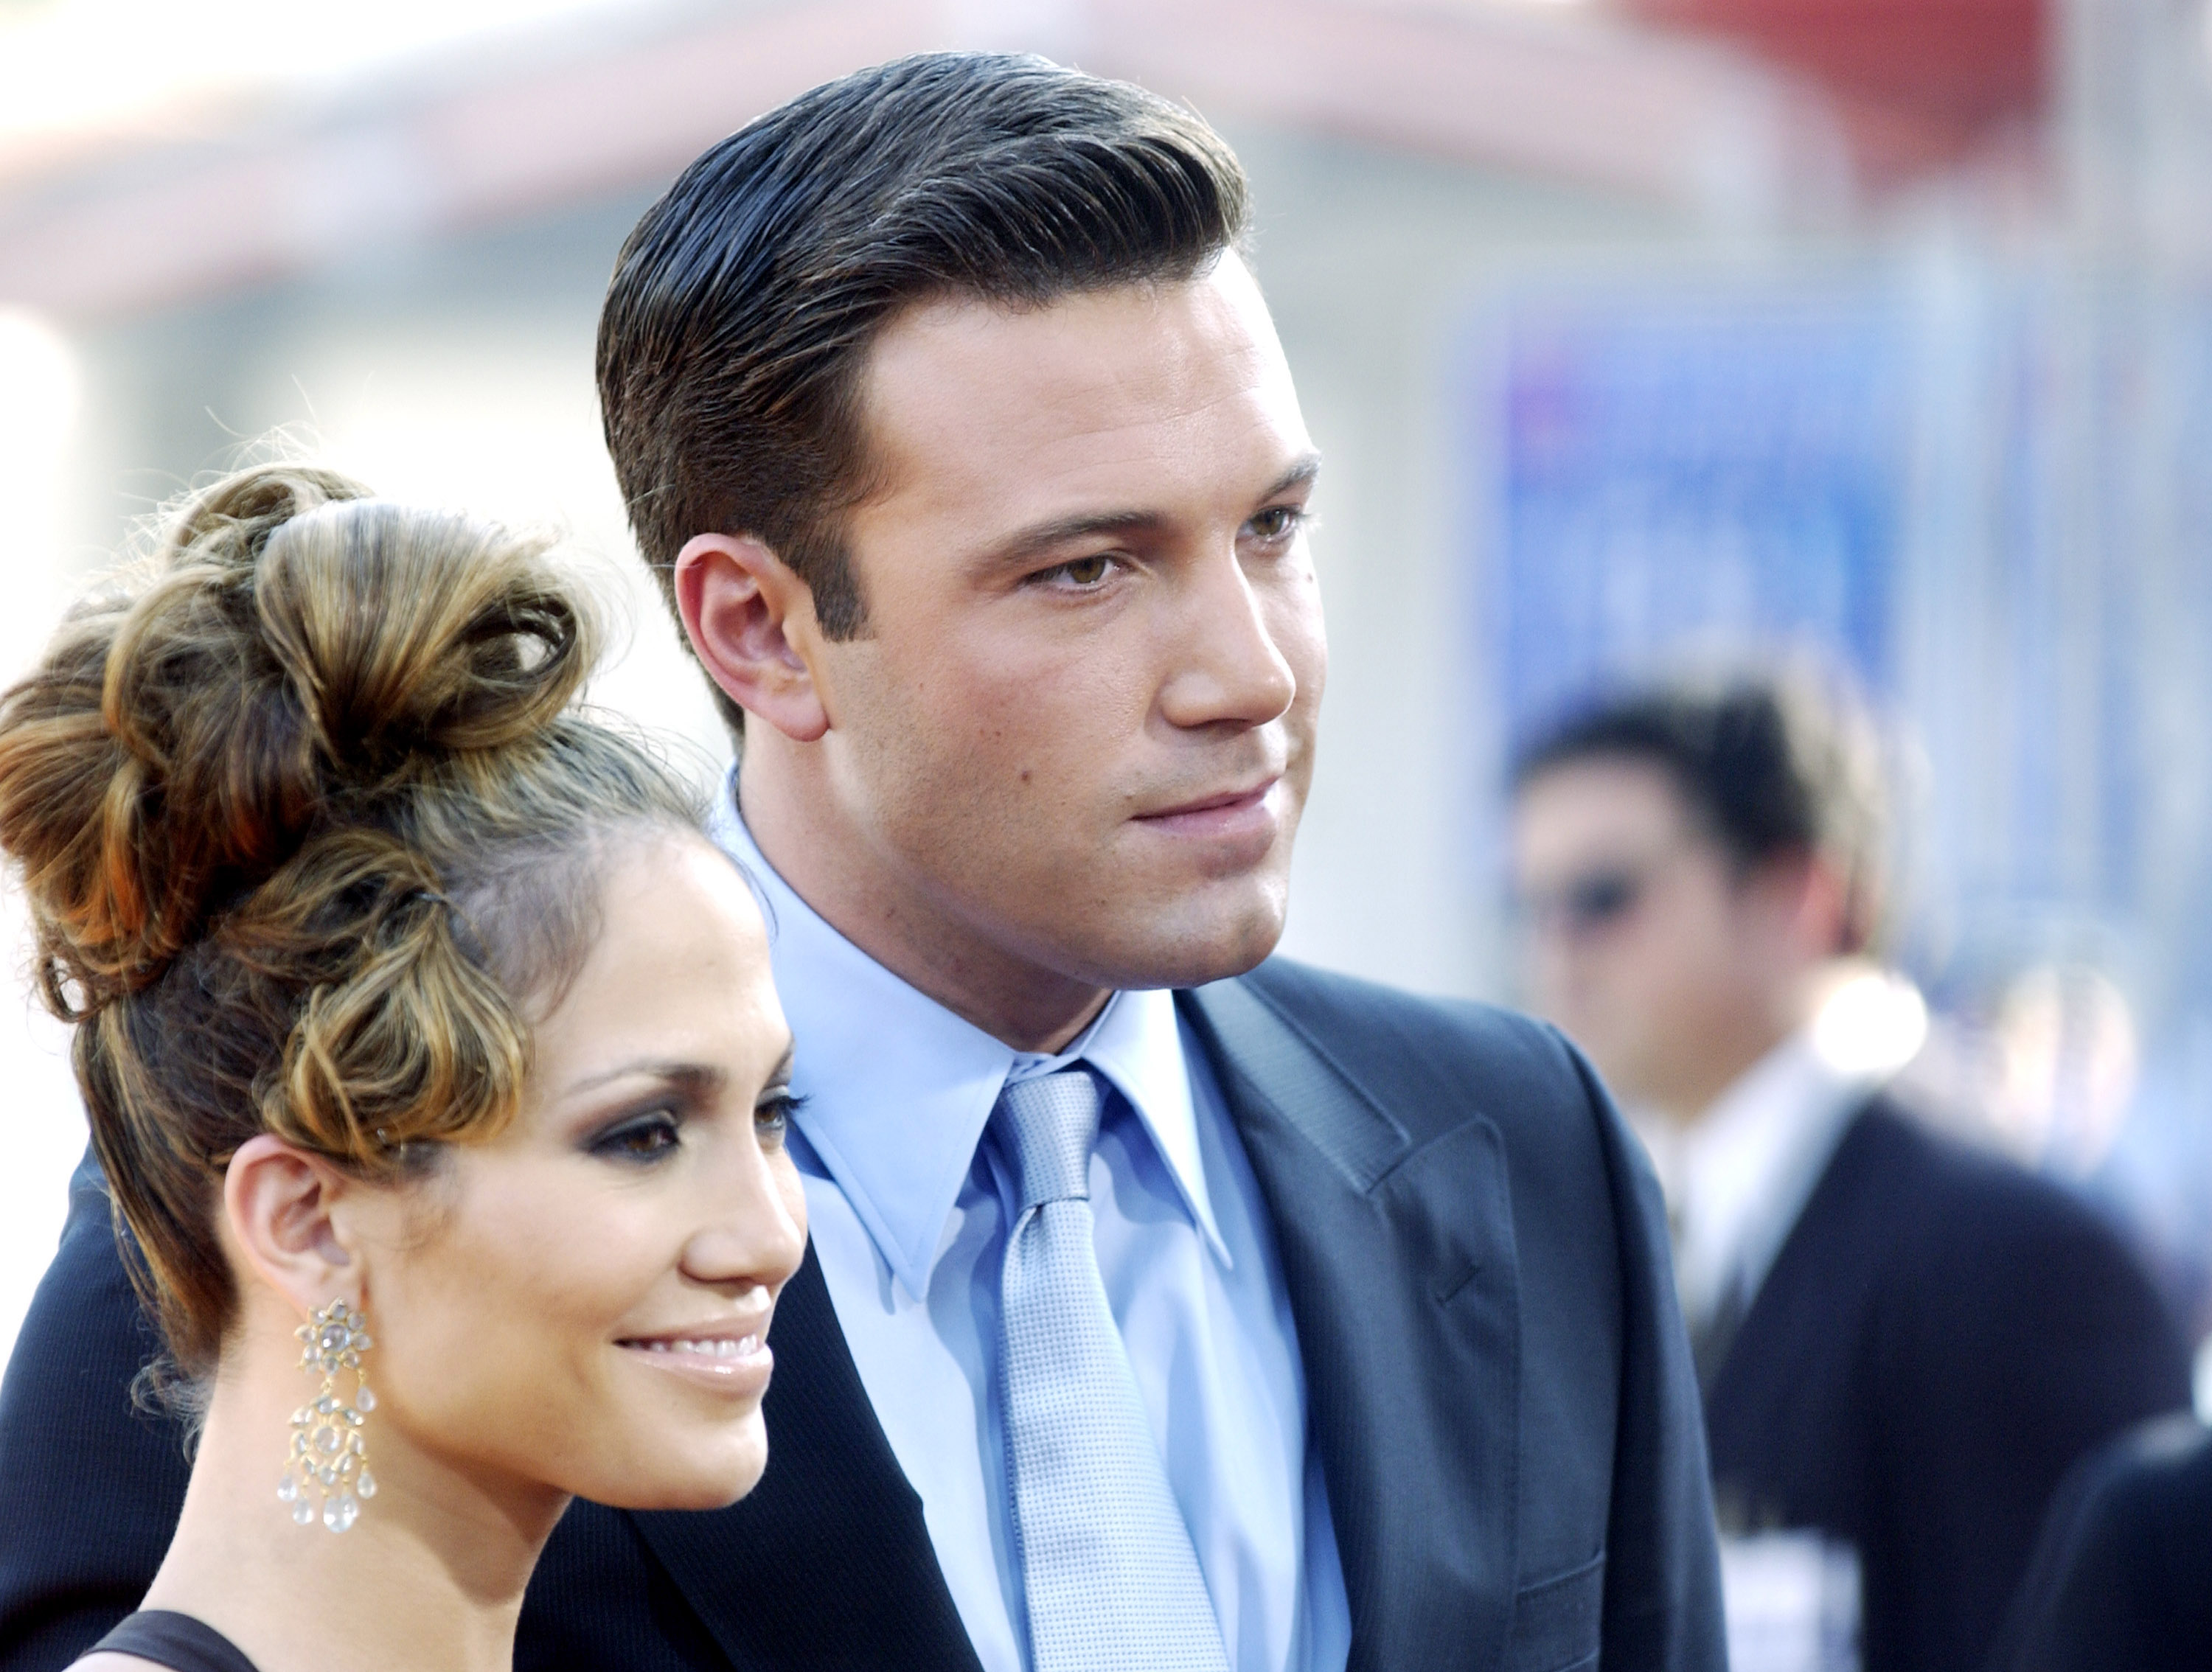 Jennifer Lopez and Ben Affleck at the "Gigli" California Premiere at Mann National in Westwood, California, United States. (Chris Weeks—FilmMagic/Getty Images)